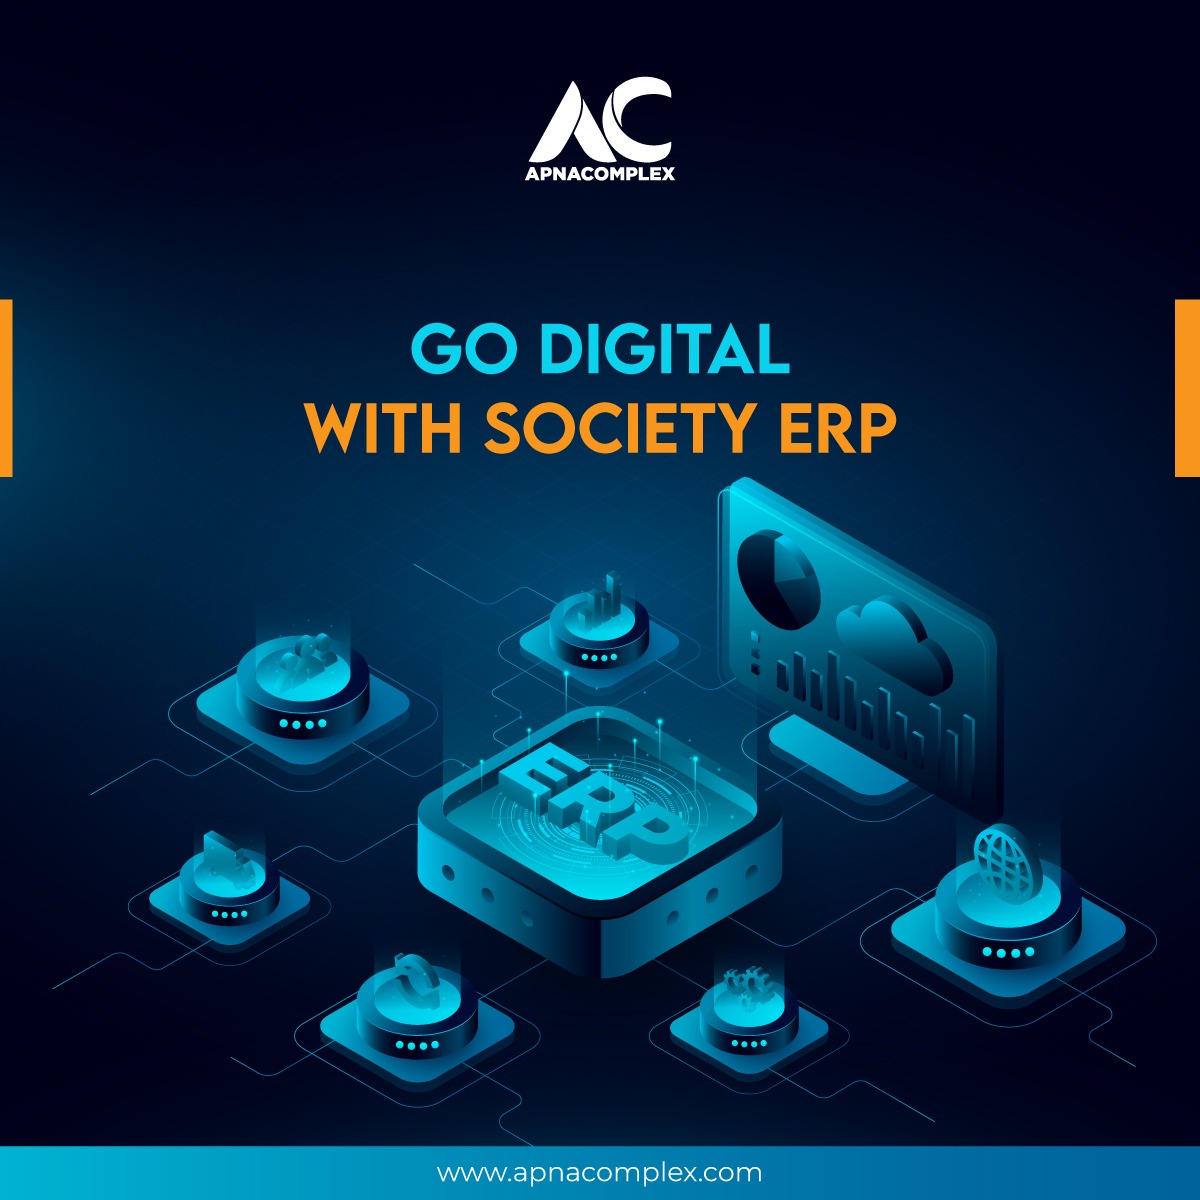 Graphic with text "Go digital with society ERP"